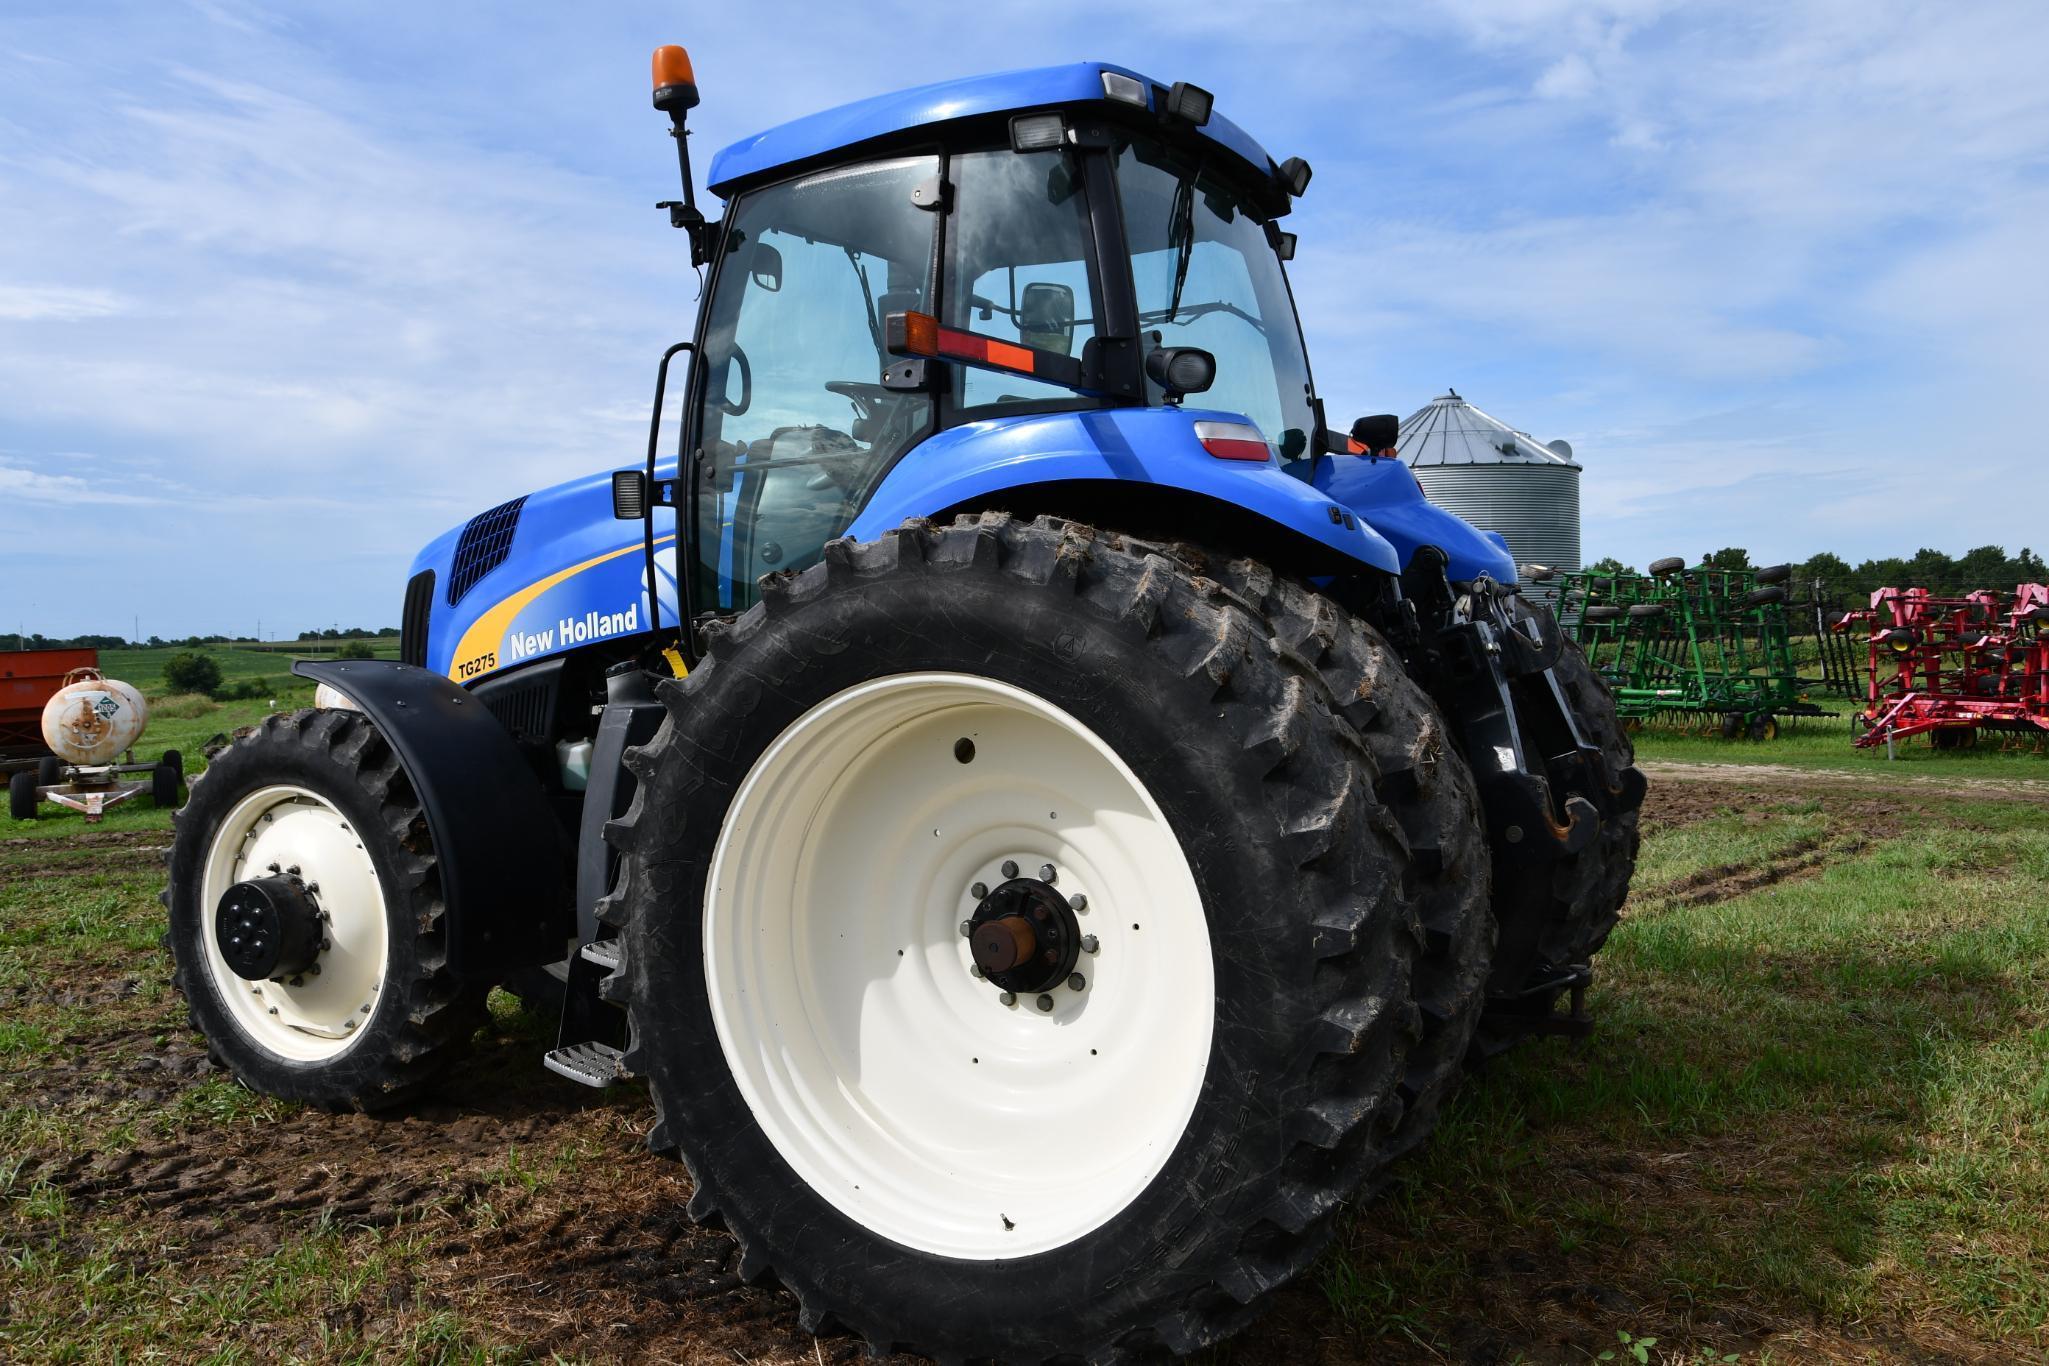 2005 New Holland TG275 MFWD tractor